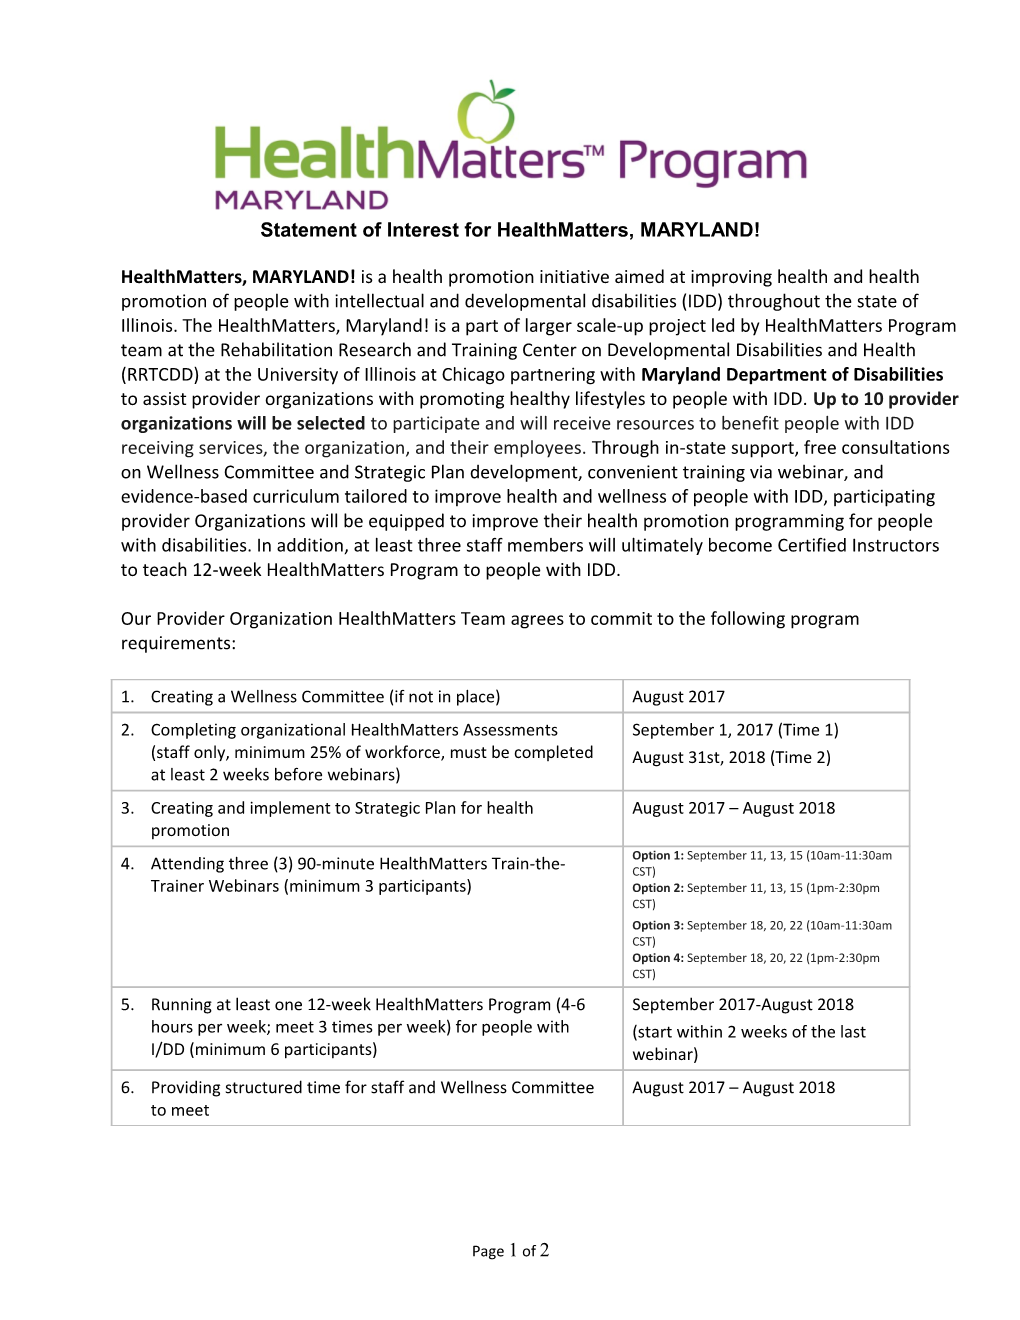 Statement of Interest for Healthmatters, MARYLAND!